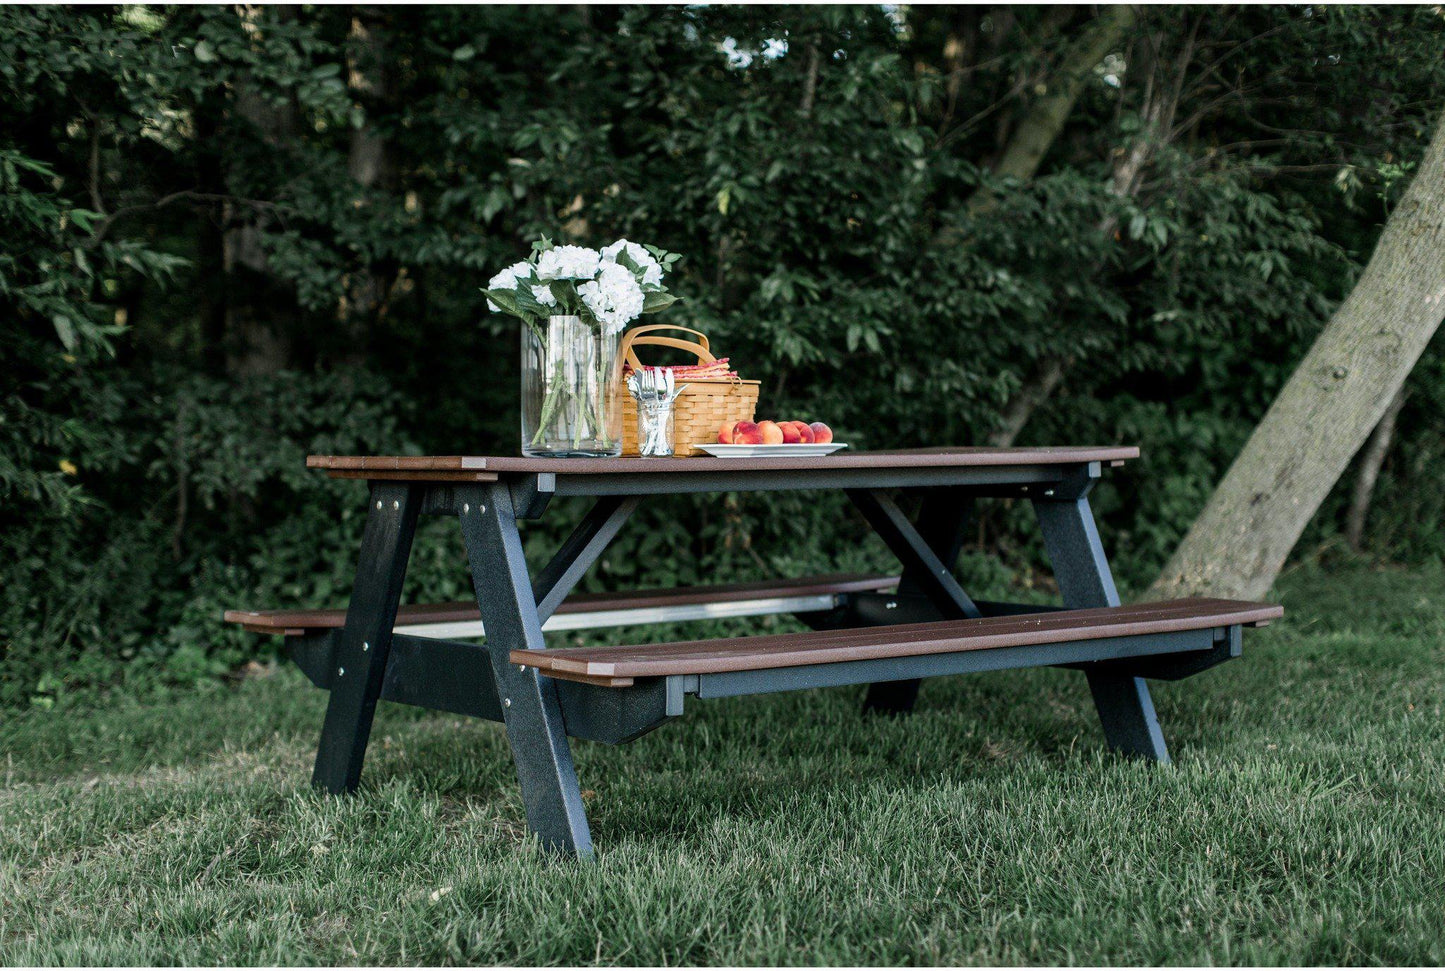 Wildridge Heritage Recycled Plastic 5' Picnic Table Attached Benches (QUICK SHIP) - LEAD TIME TO SHIP 3 TO 4 BUSINESS DAYS